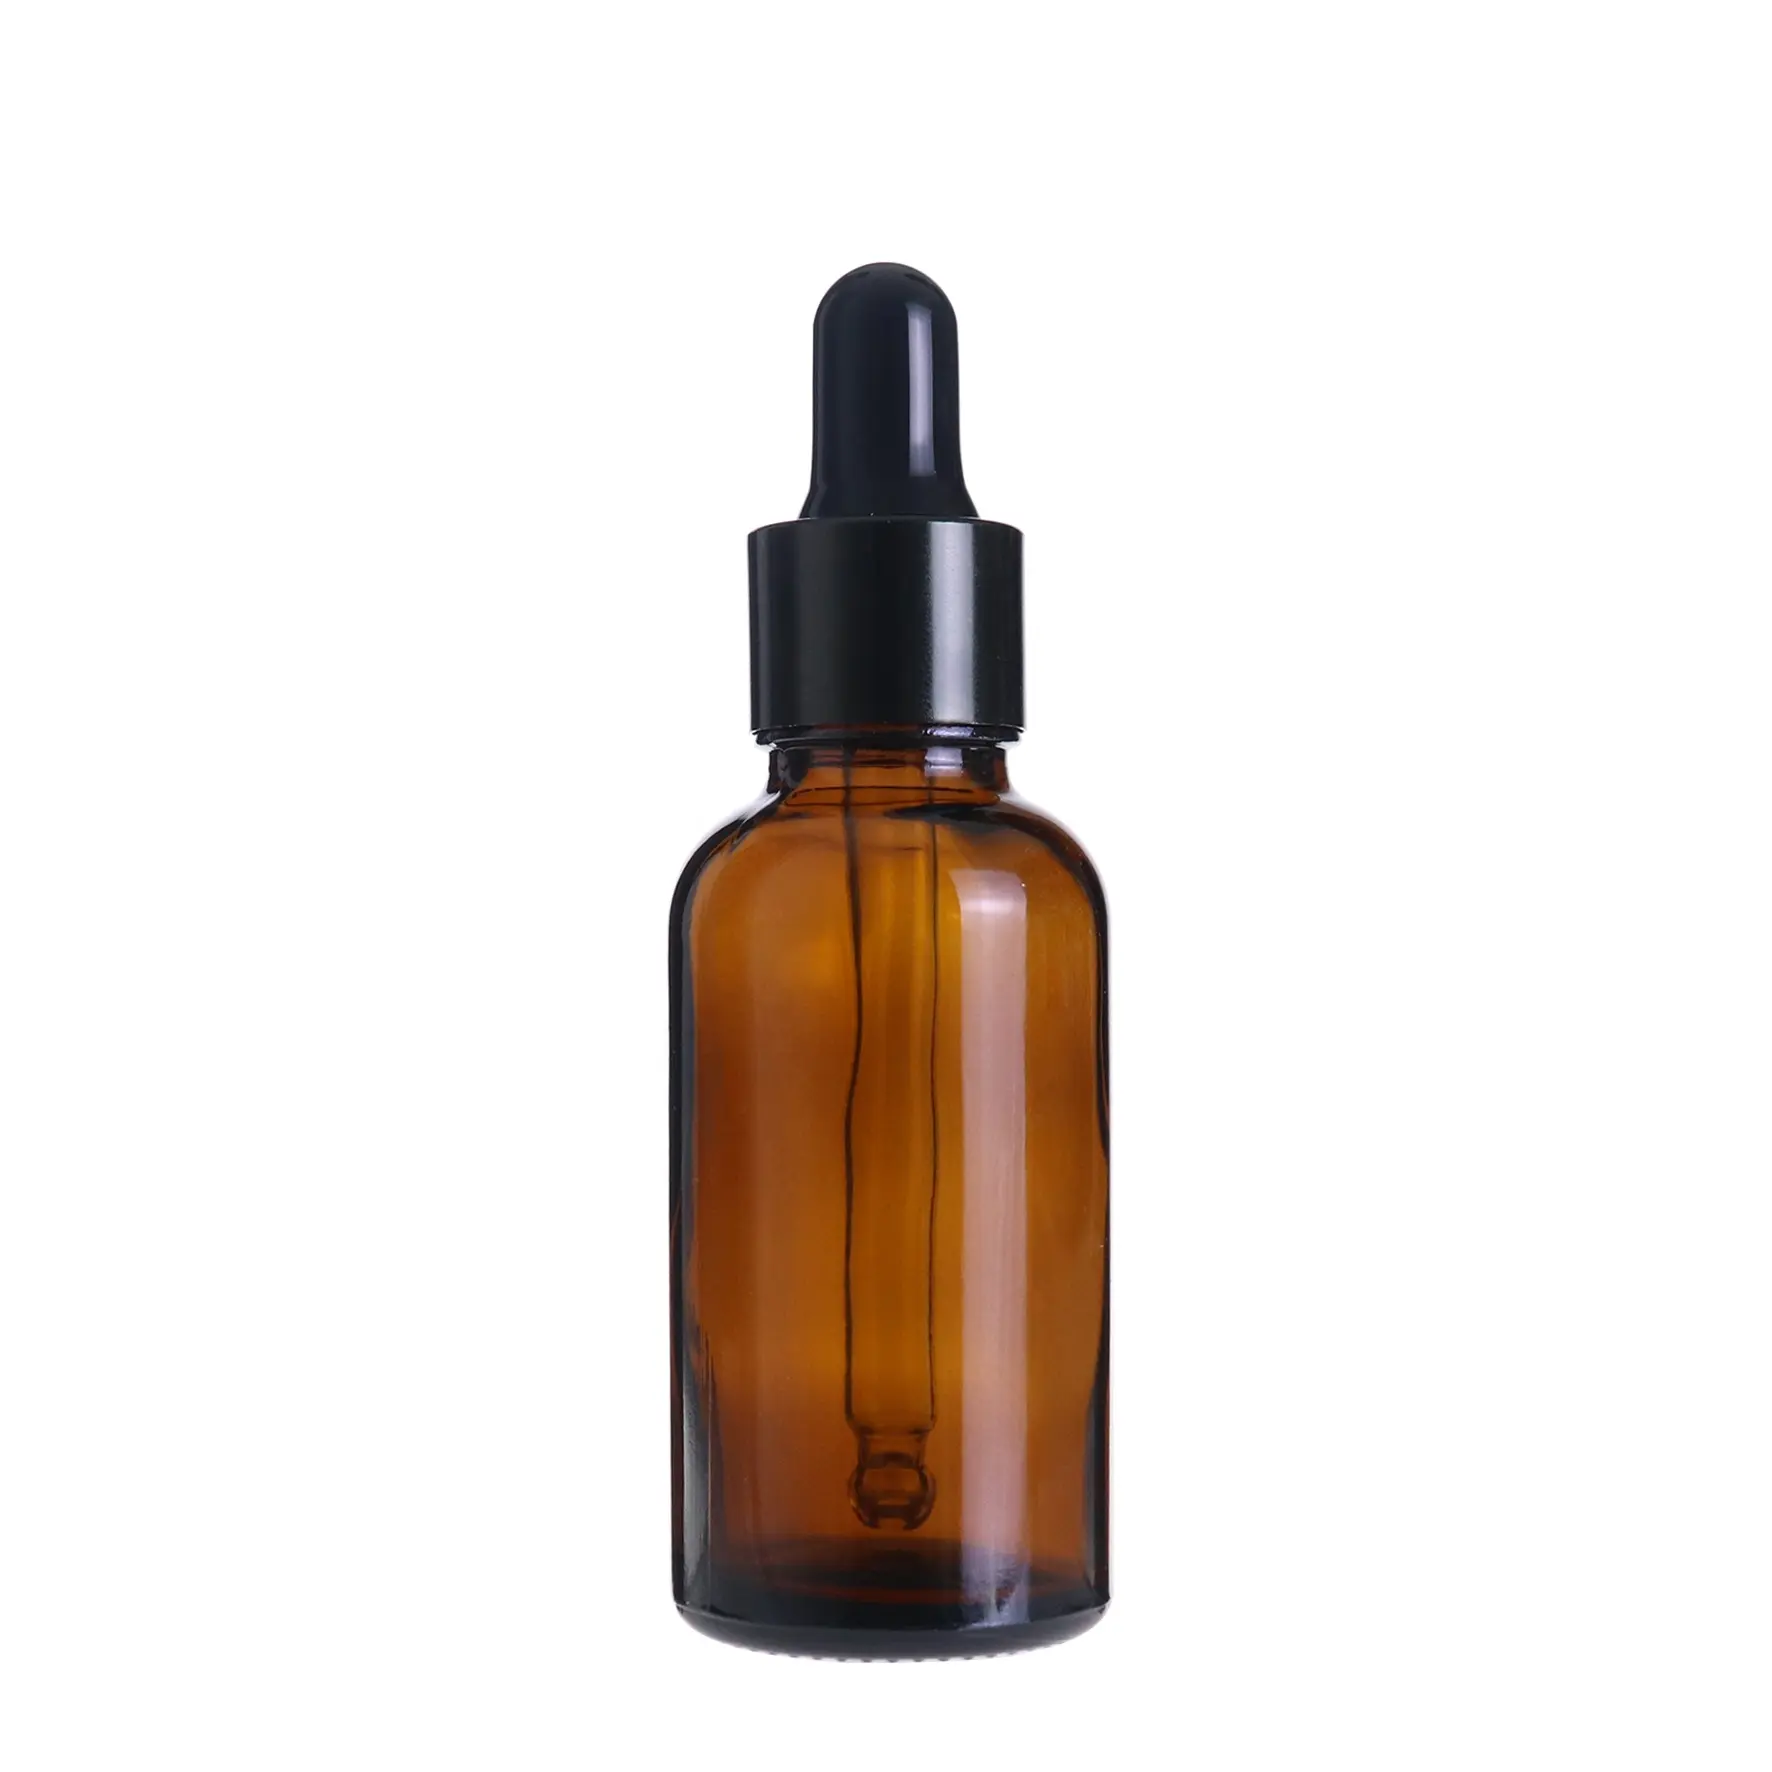 Cosmetics Cream Essential Oil Screen Printing Amber 30ml Glass Orange Oil Glass Eye Dropper Bottle with lid and drop